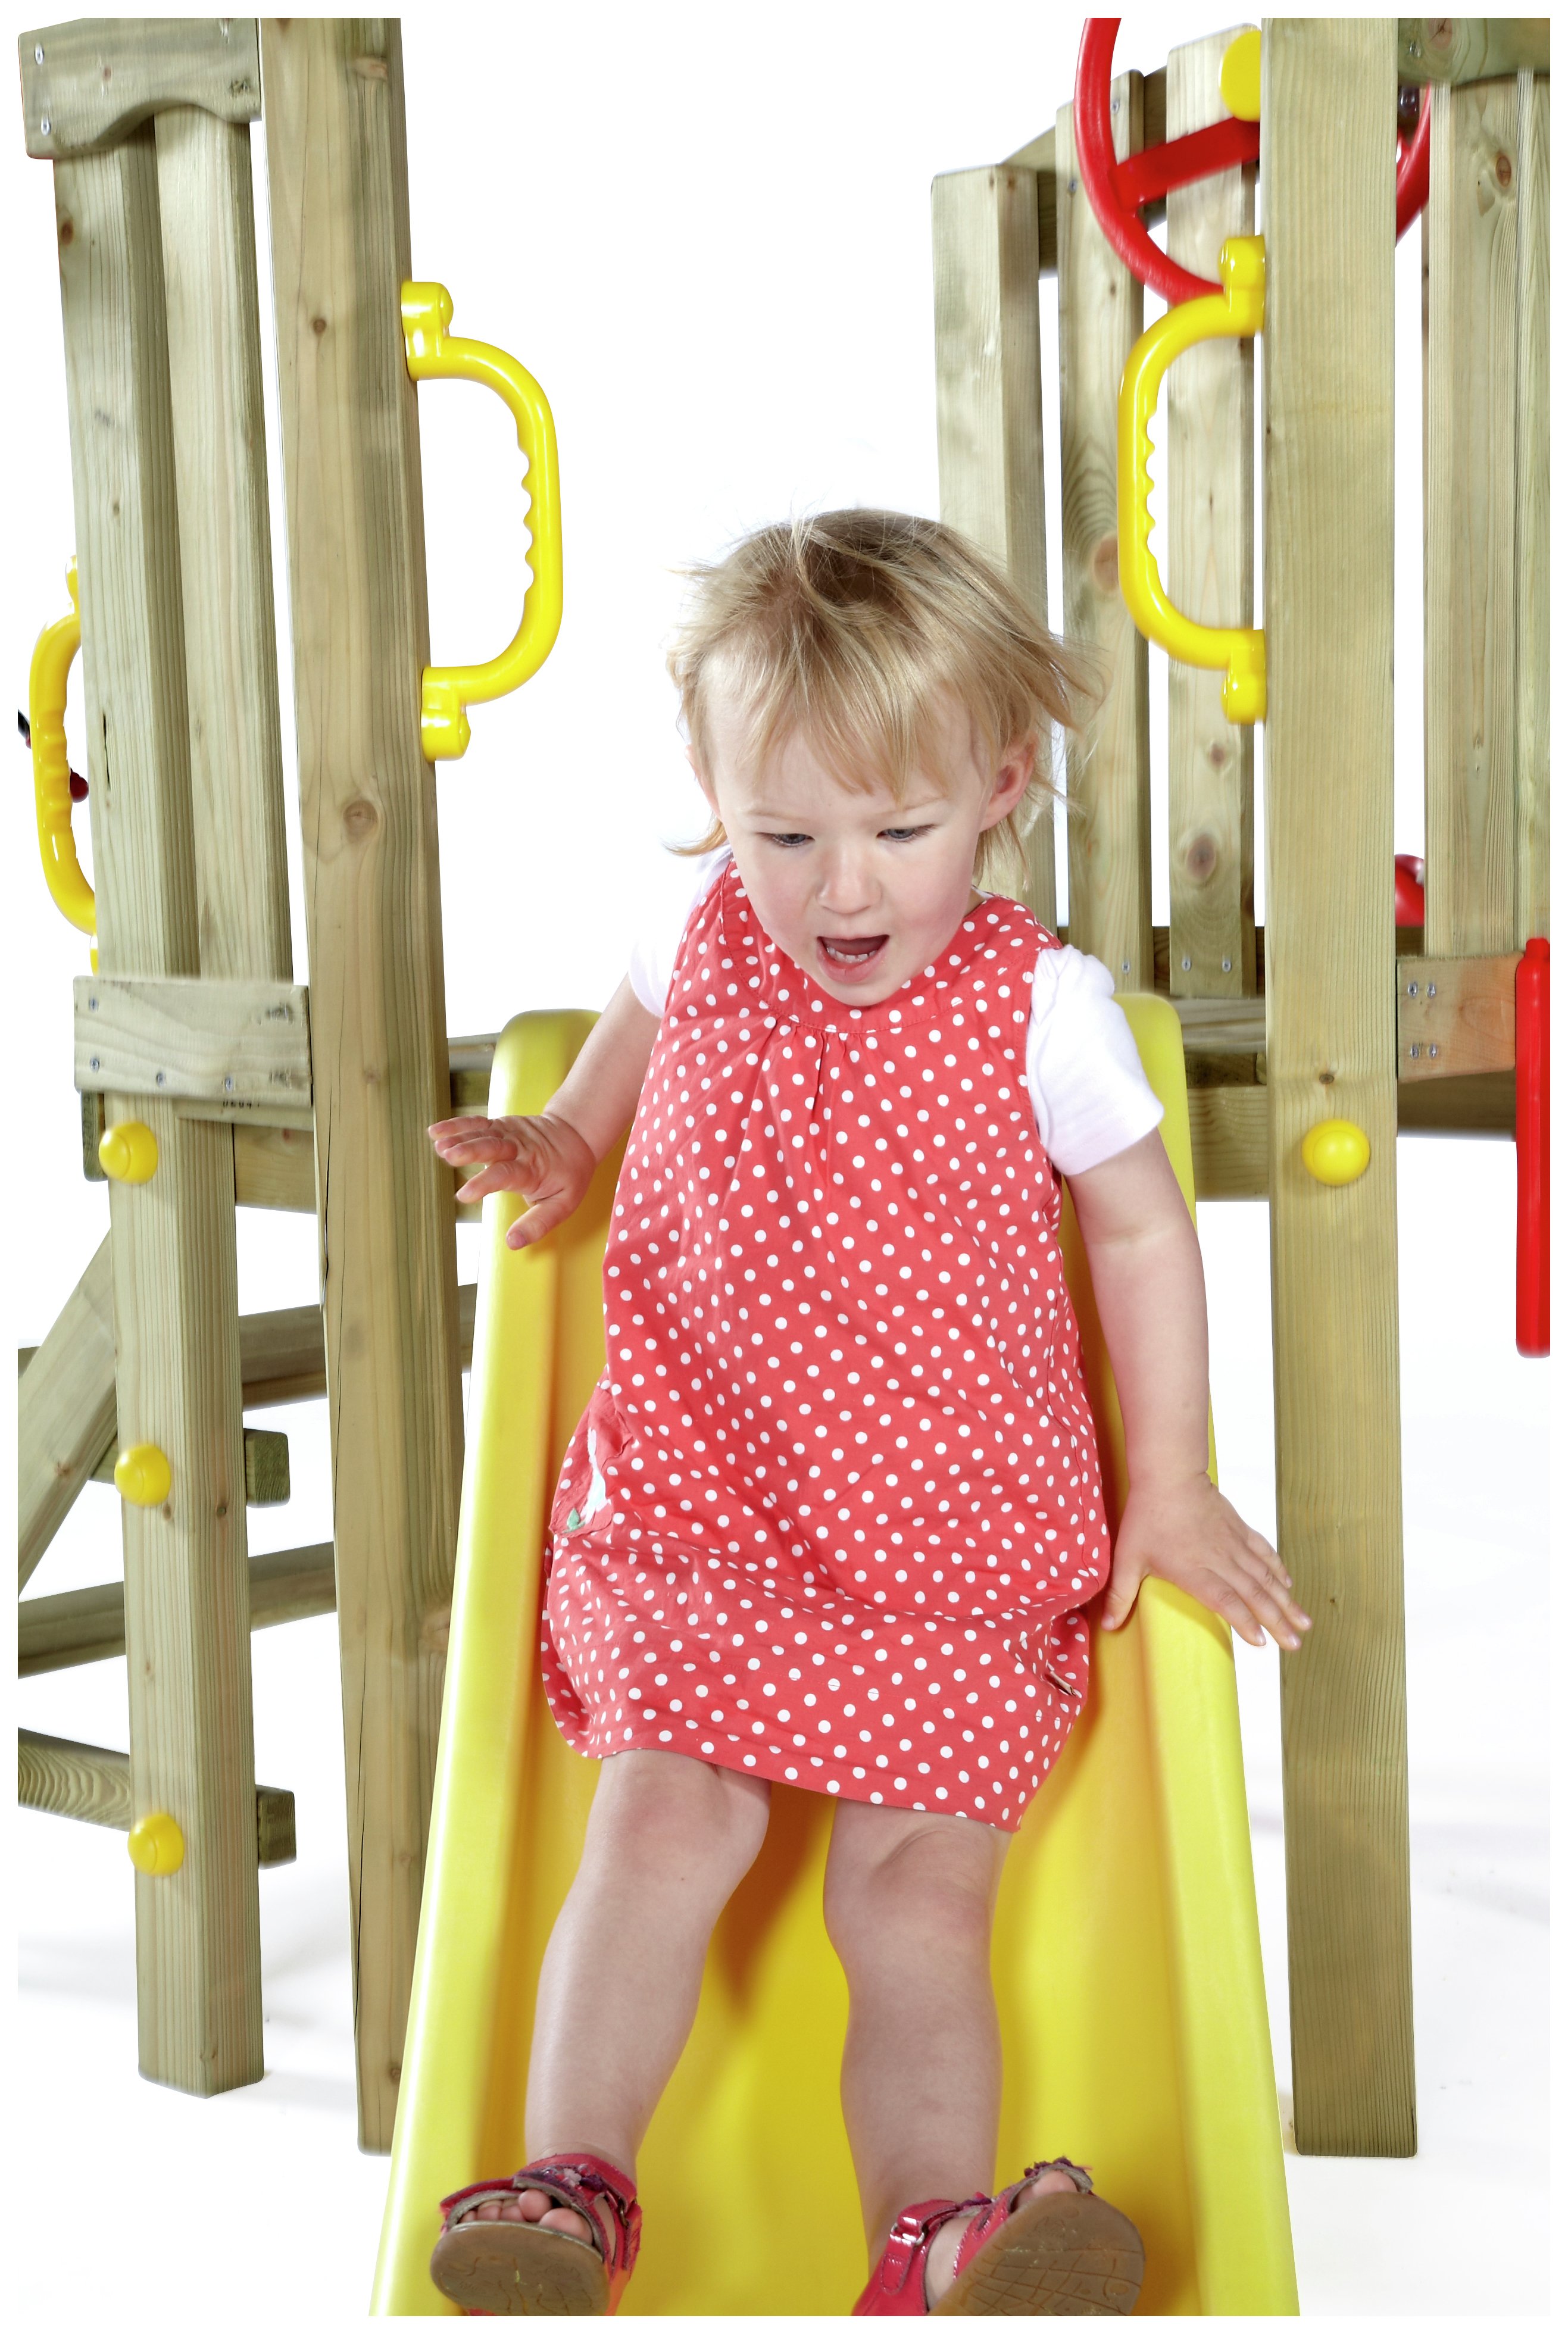 Plum Toddlers Tower Wooden Climbing Frame Review